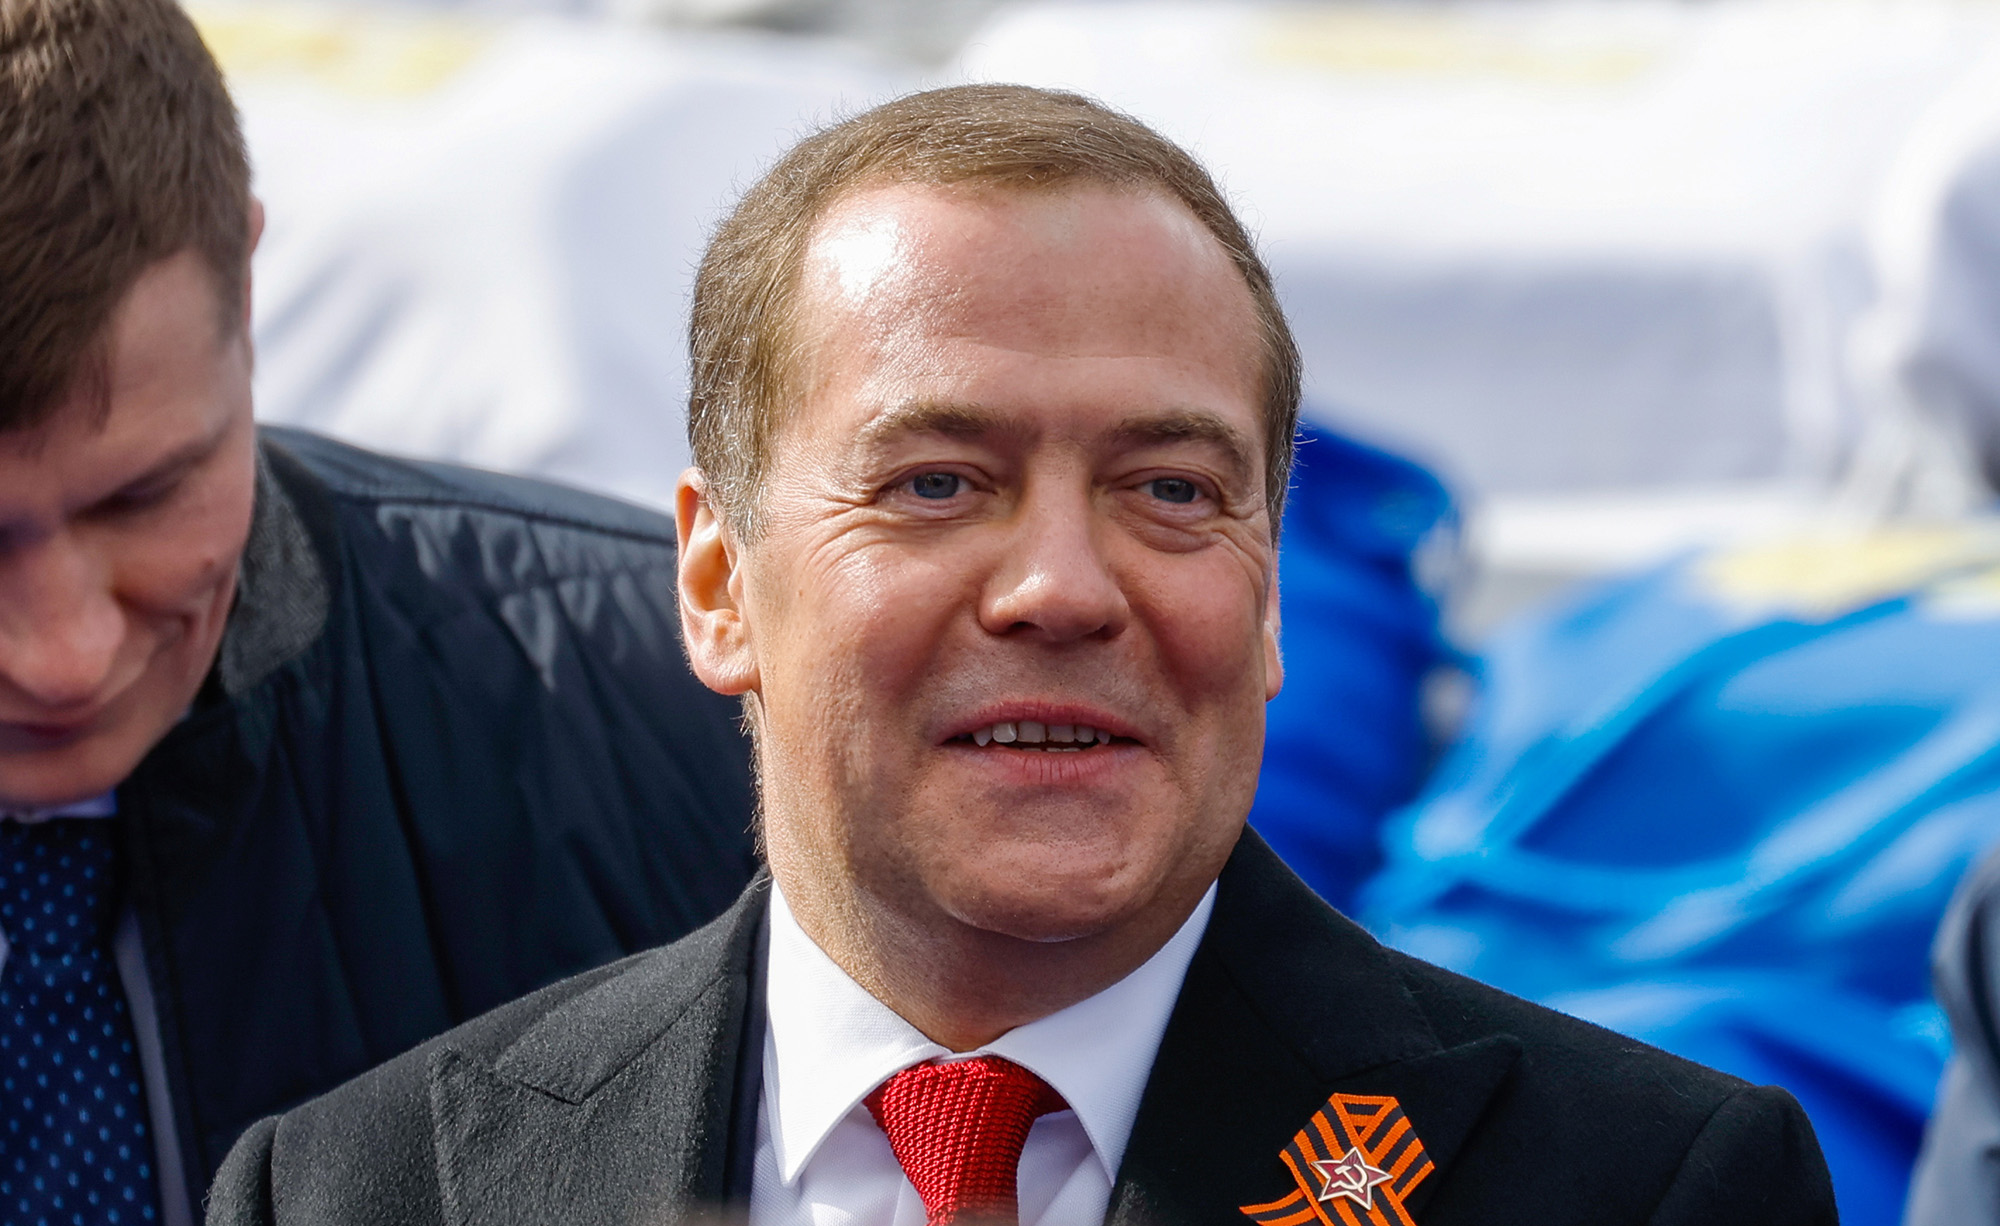 Deputy Chairman of Russia's Security Council Dmitry Medvedev attends a military parade on Victory Day in central Moscow, Russia, on May 9.